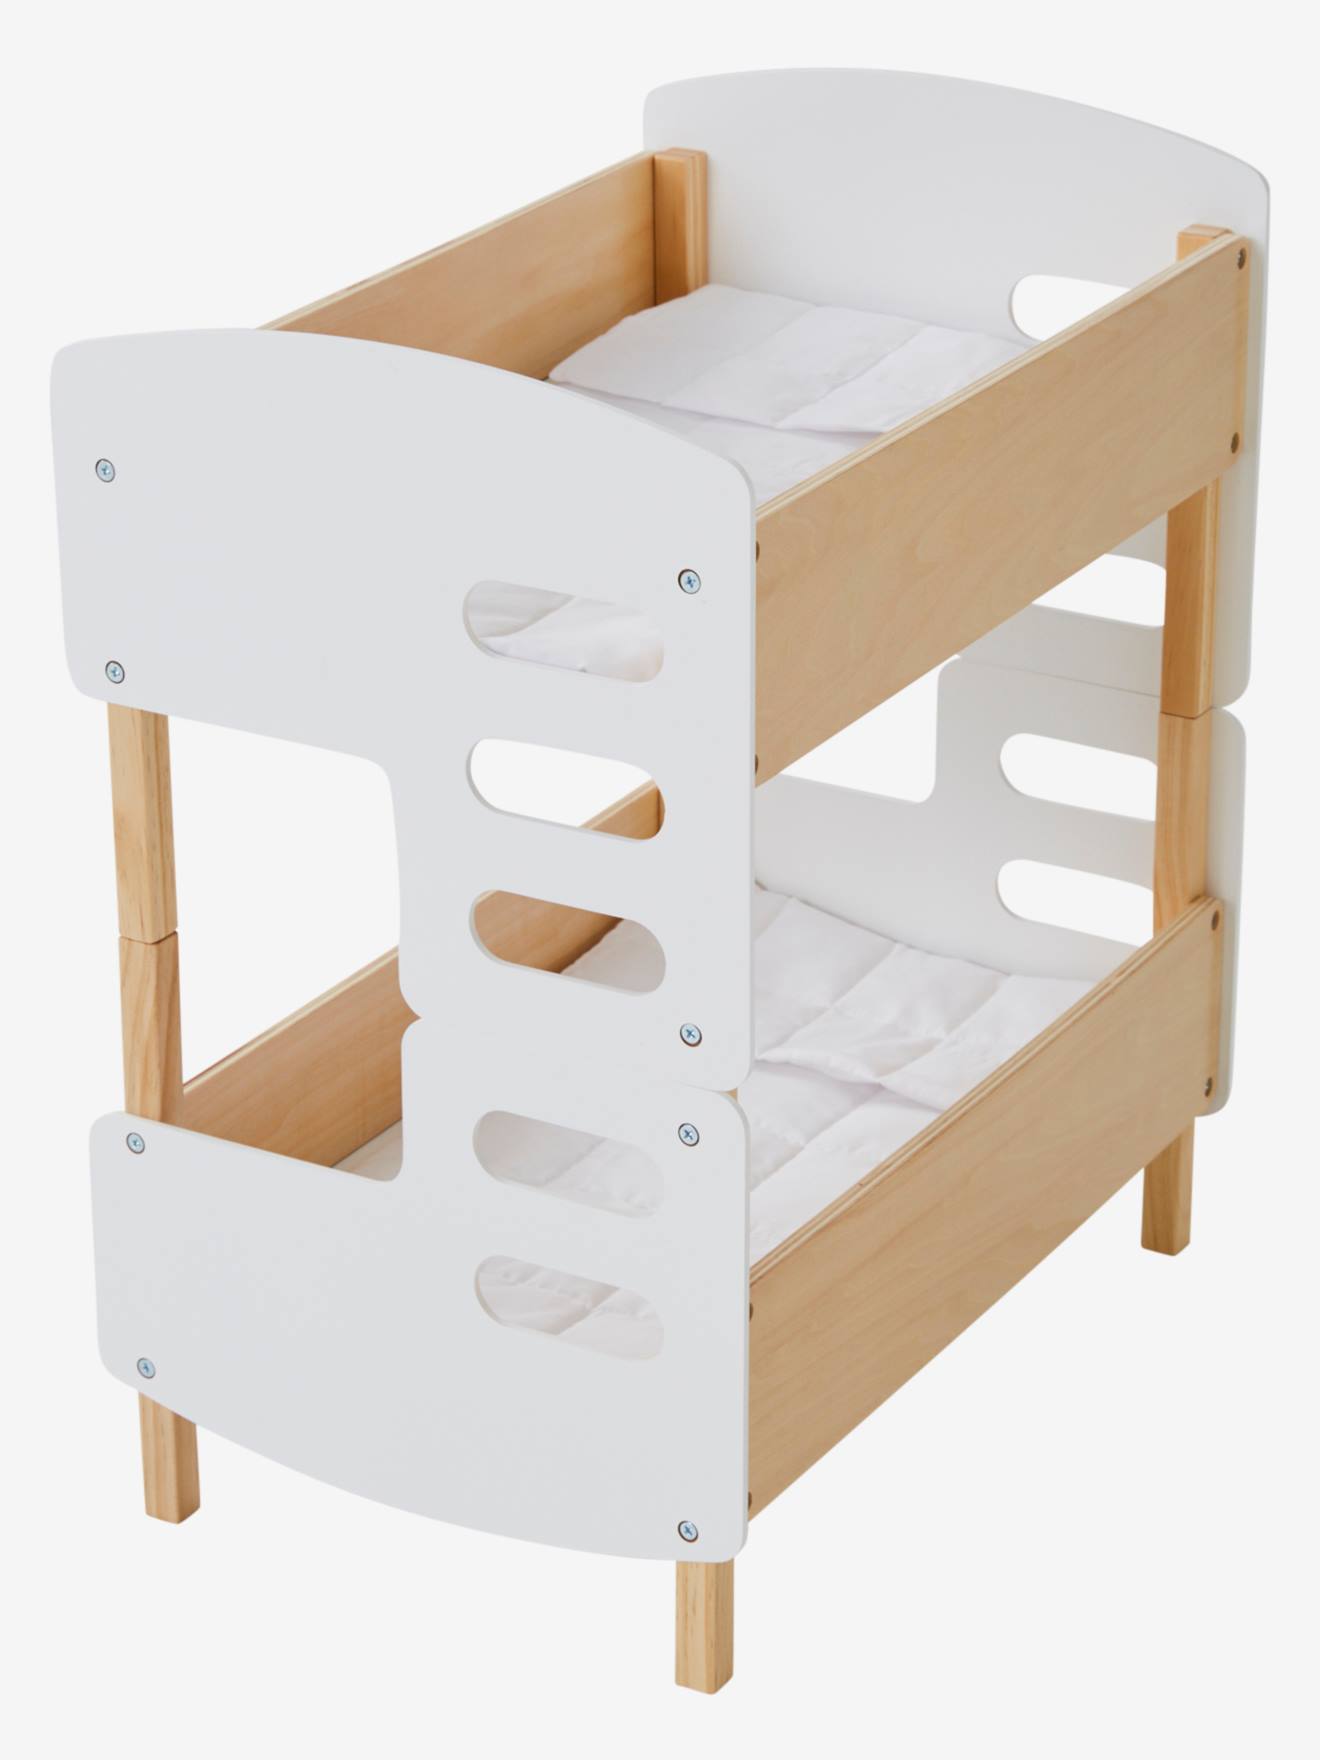 wooden bunk beds for dolls